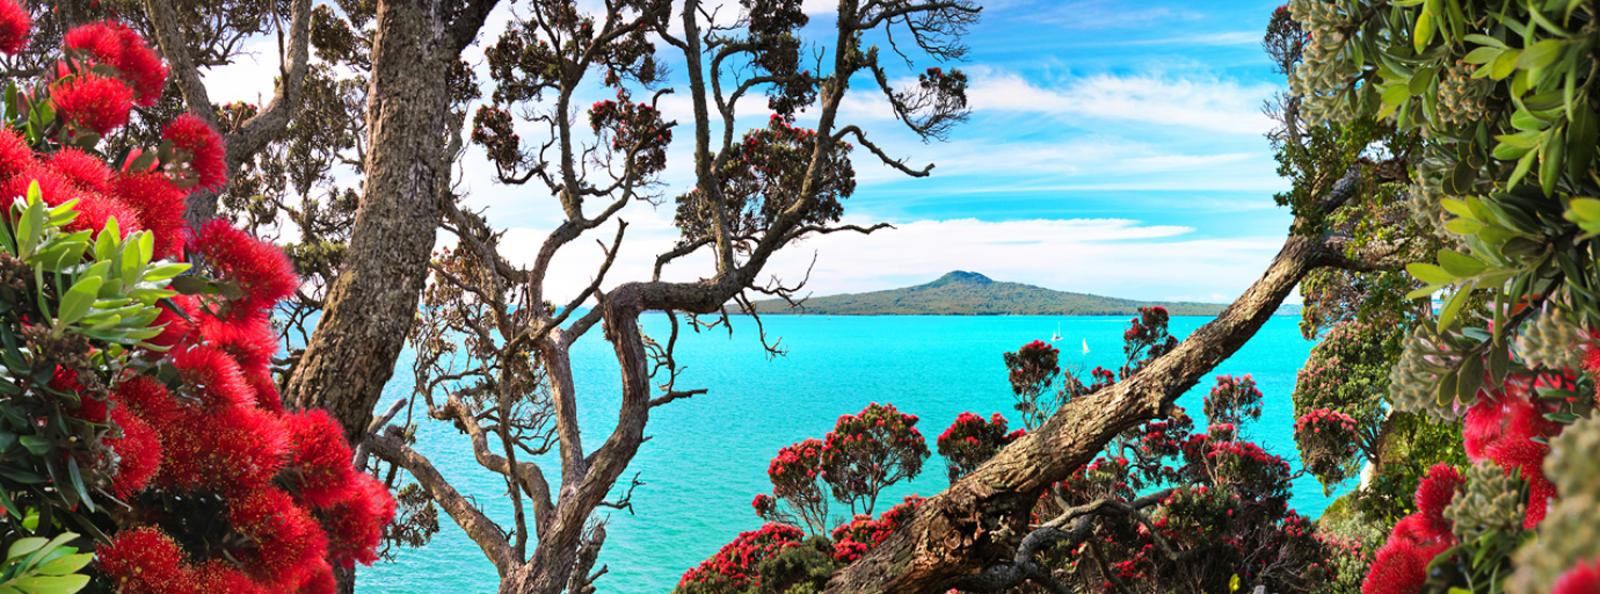 Great Sights of New Zealand Self Drive Itinerary